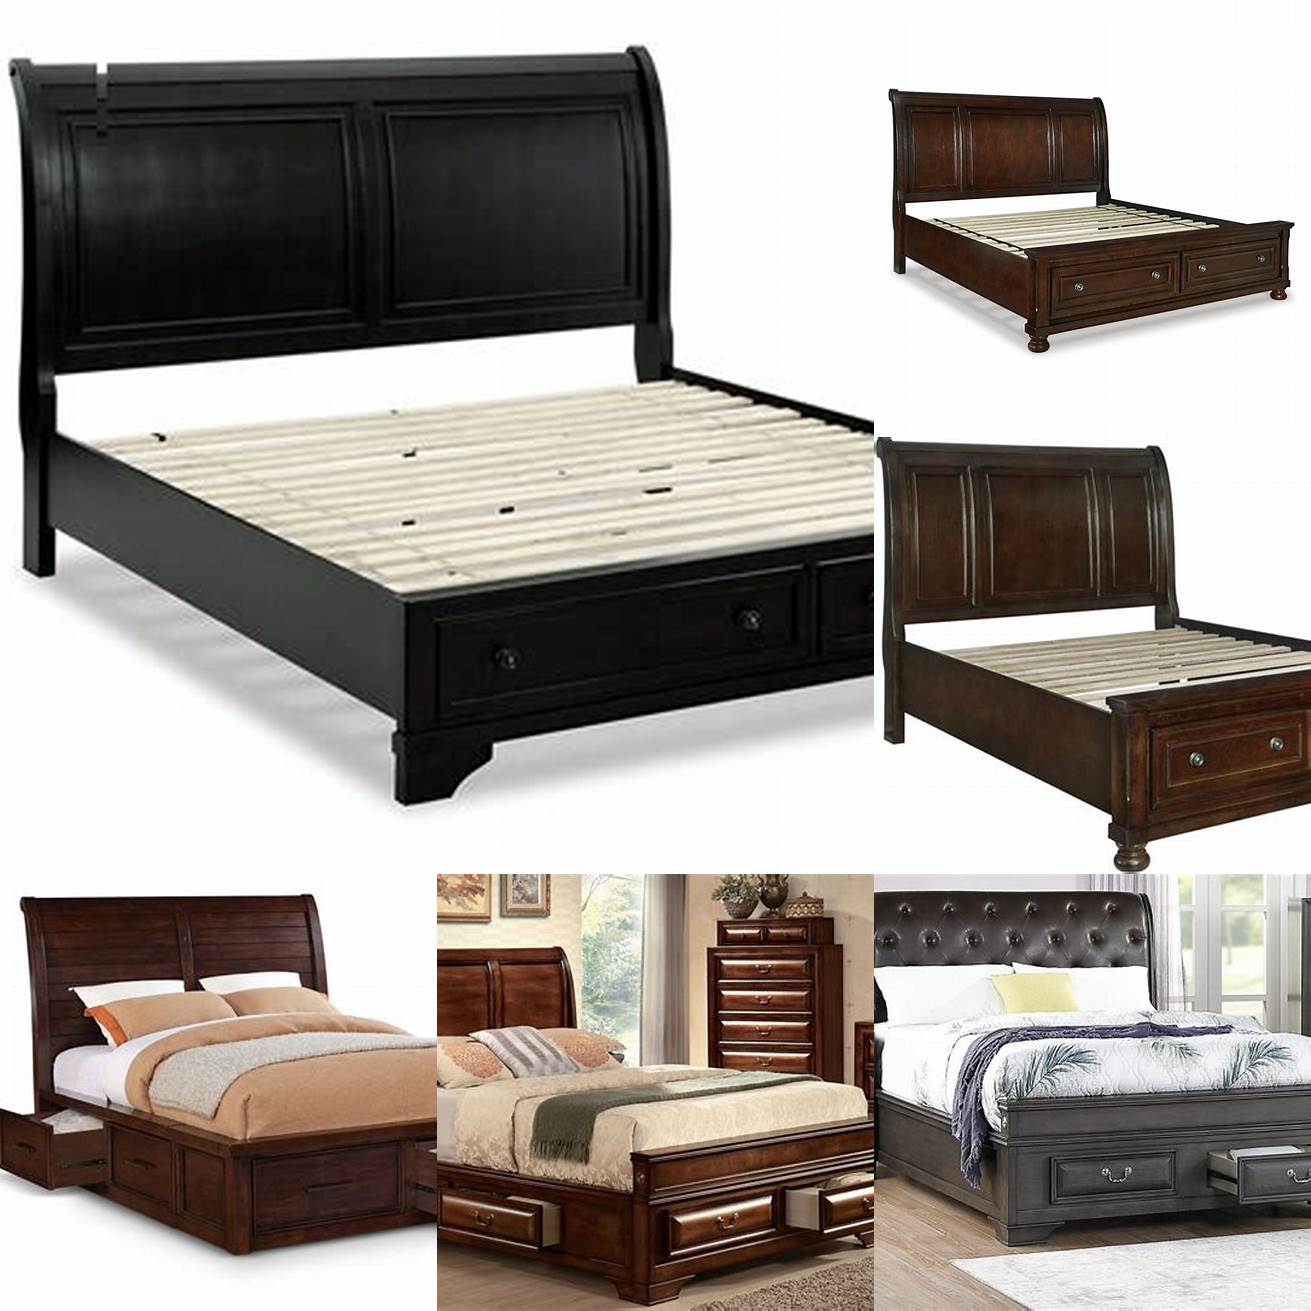 Image 5 A King Sleigh Bed with storage drawers